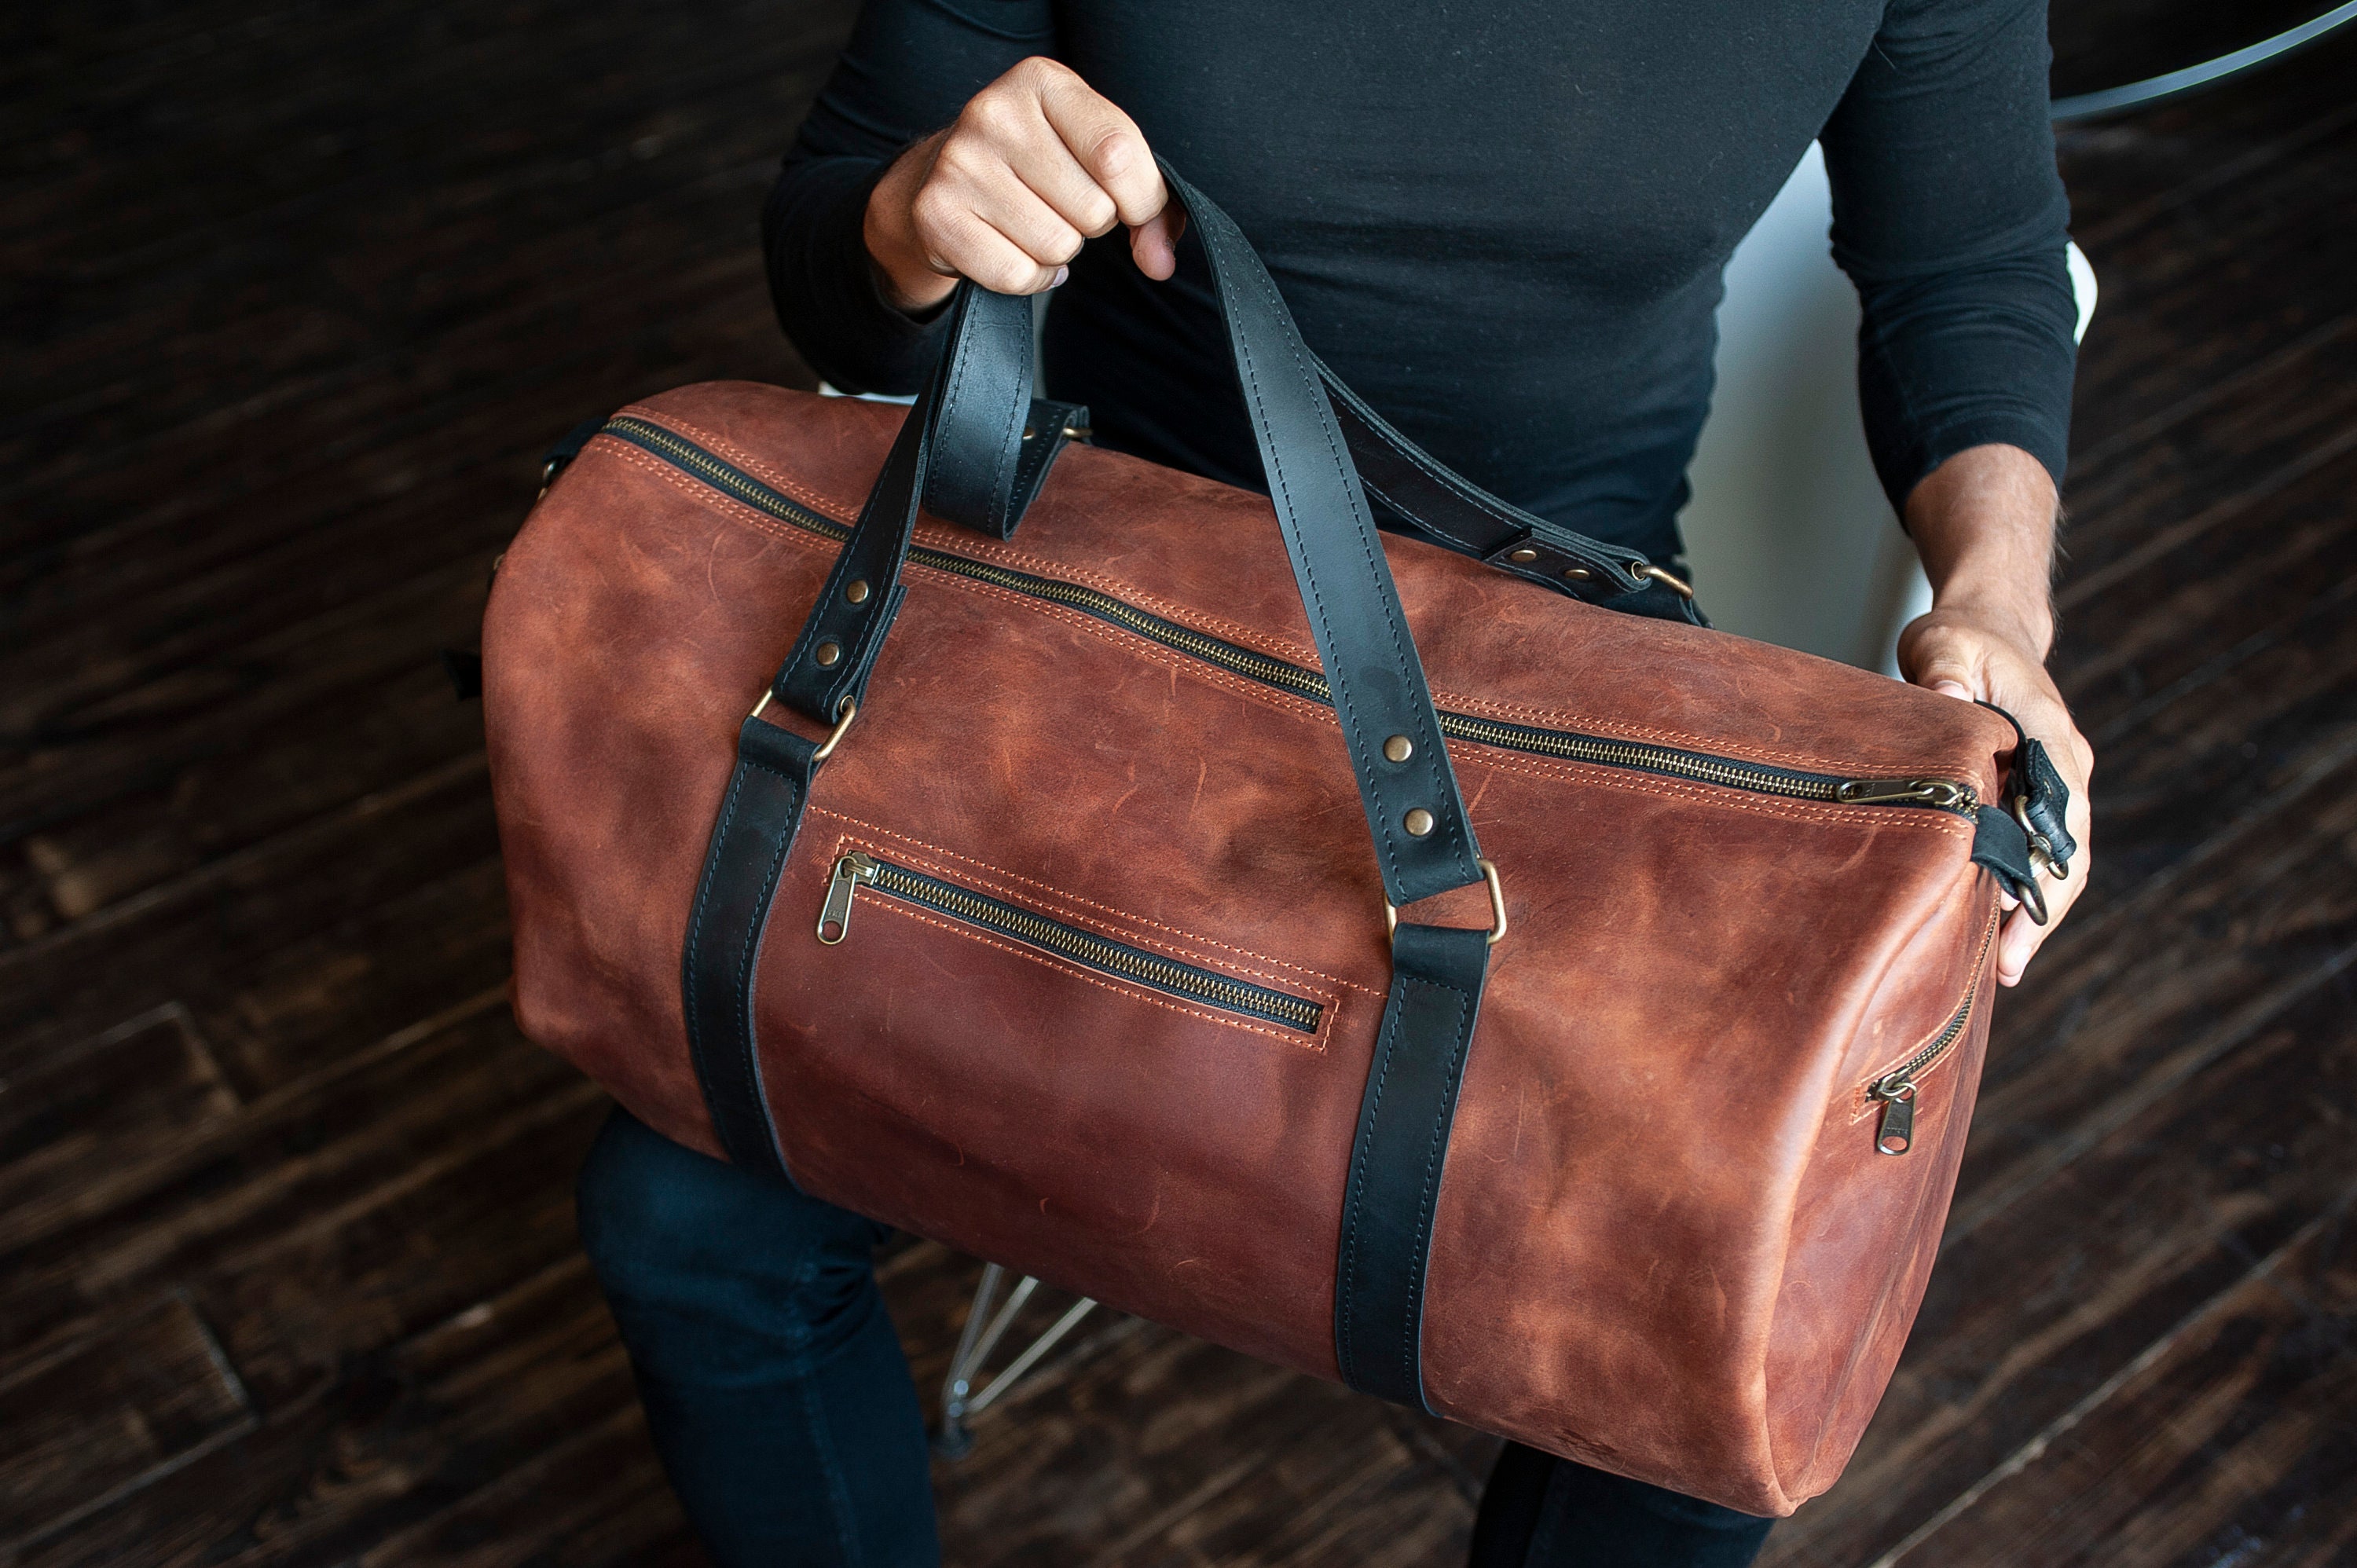 Personalized Duffle Bags For Men | IQS Executive